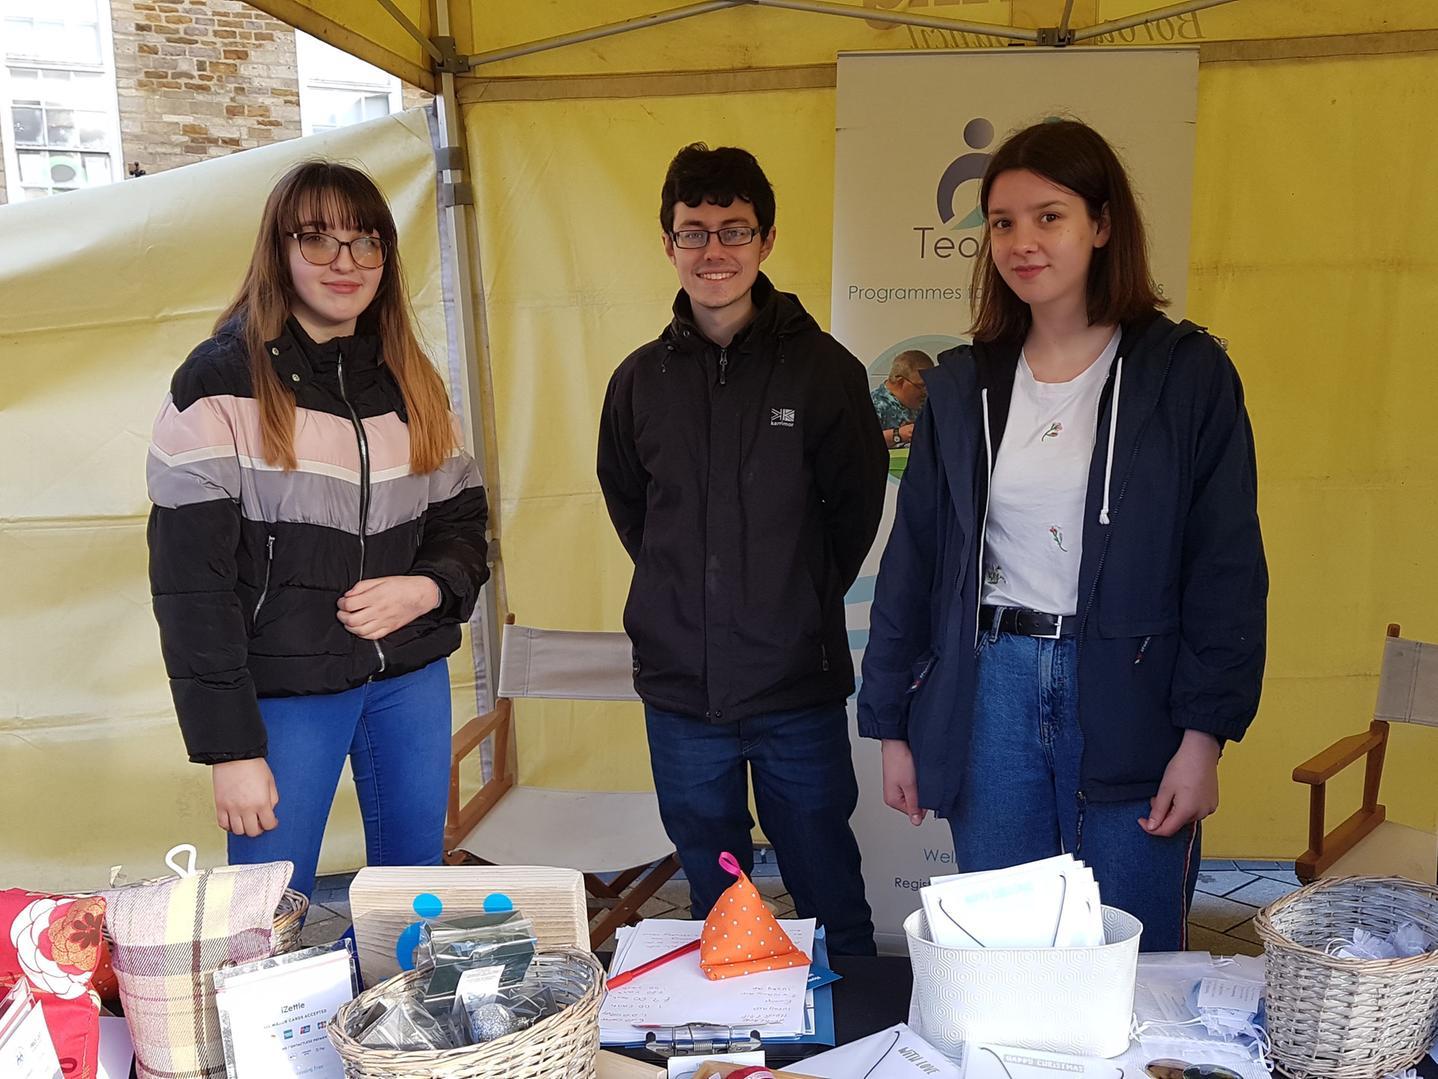 Teamwork Trust provide work-based skills, education, activities, and wellbeing services for adults with learning difficulties. All their craft items had been made by members. The stall was being run by staff member Olly (centre) and volunteers Charlotte (left), 13, and Polly (right), 17.